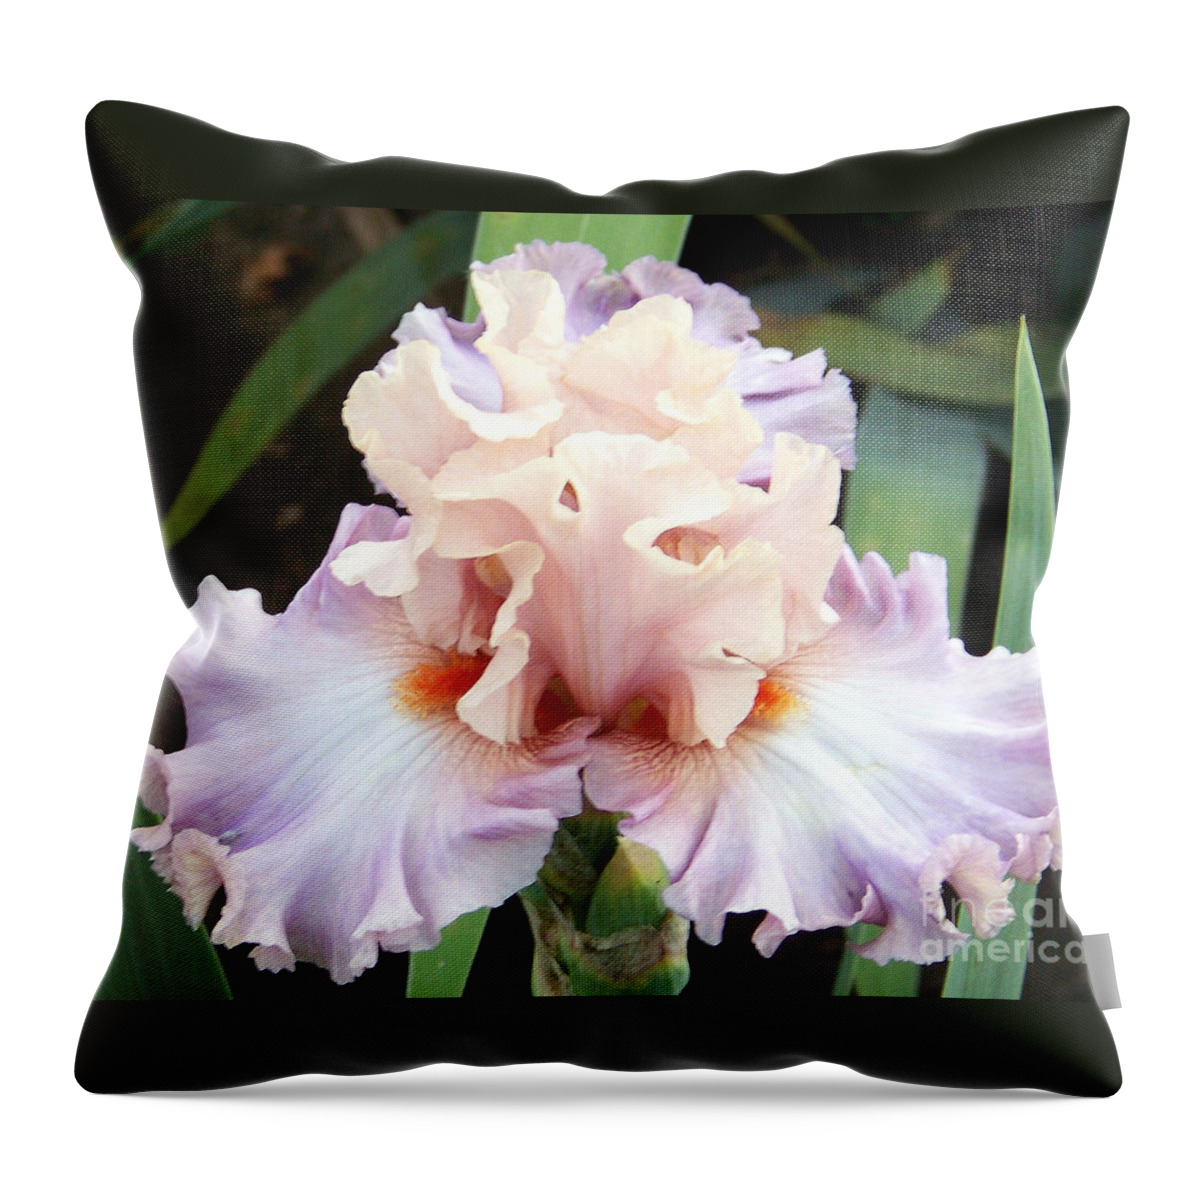 Iris Throw Pillow featuring the photograph Pastel Variations by Dorrene BrownButterfield